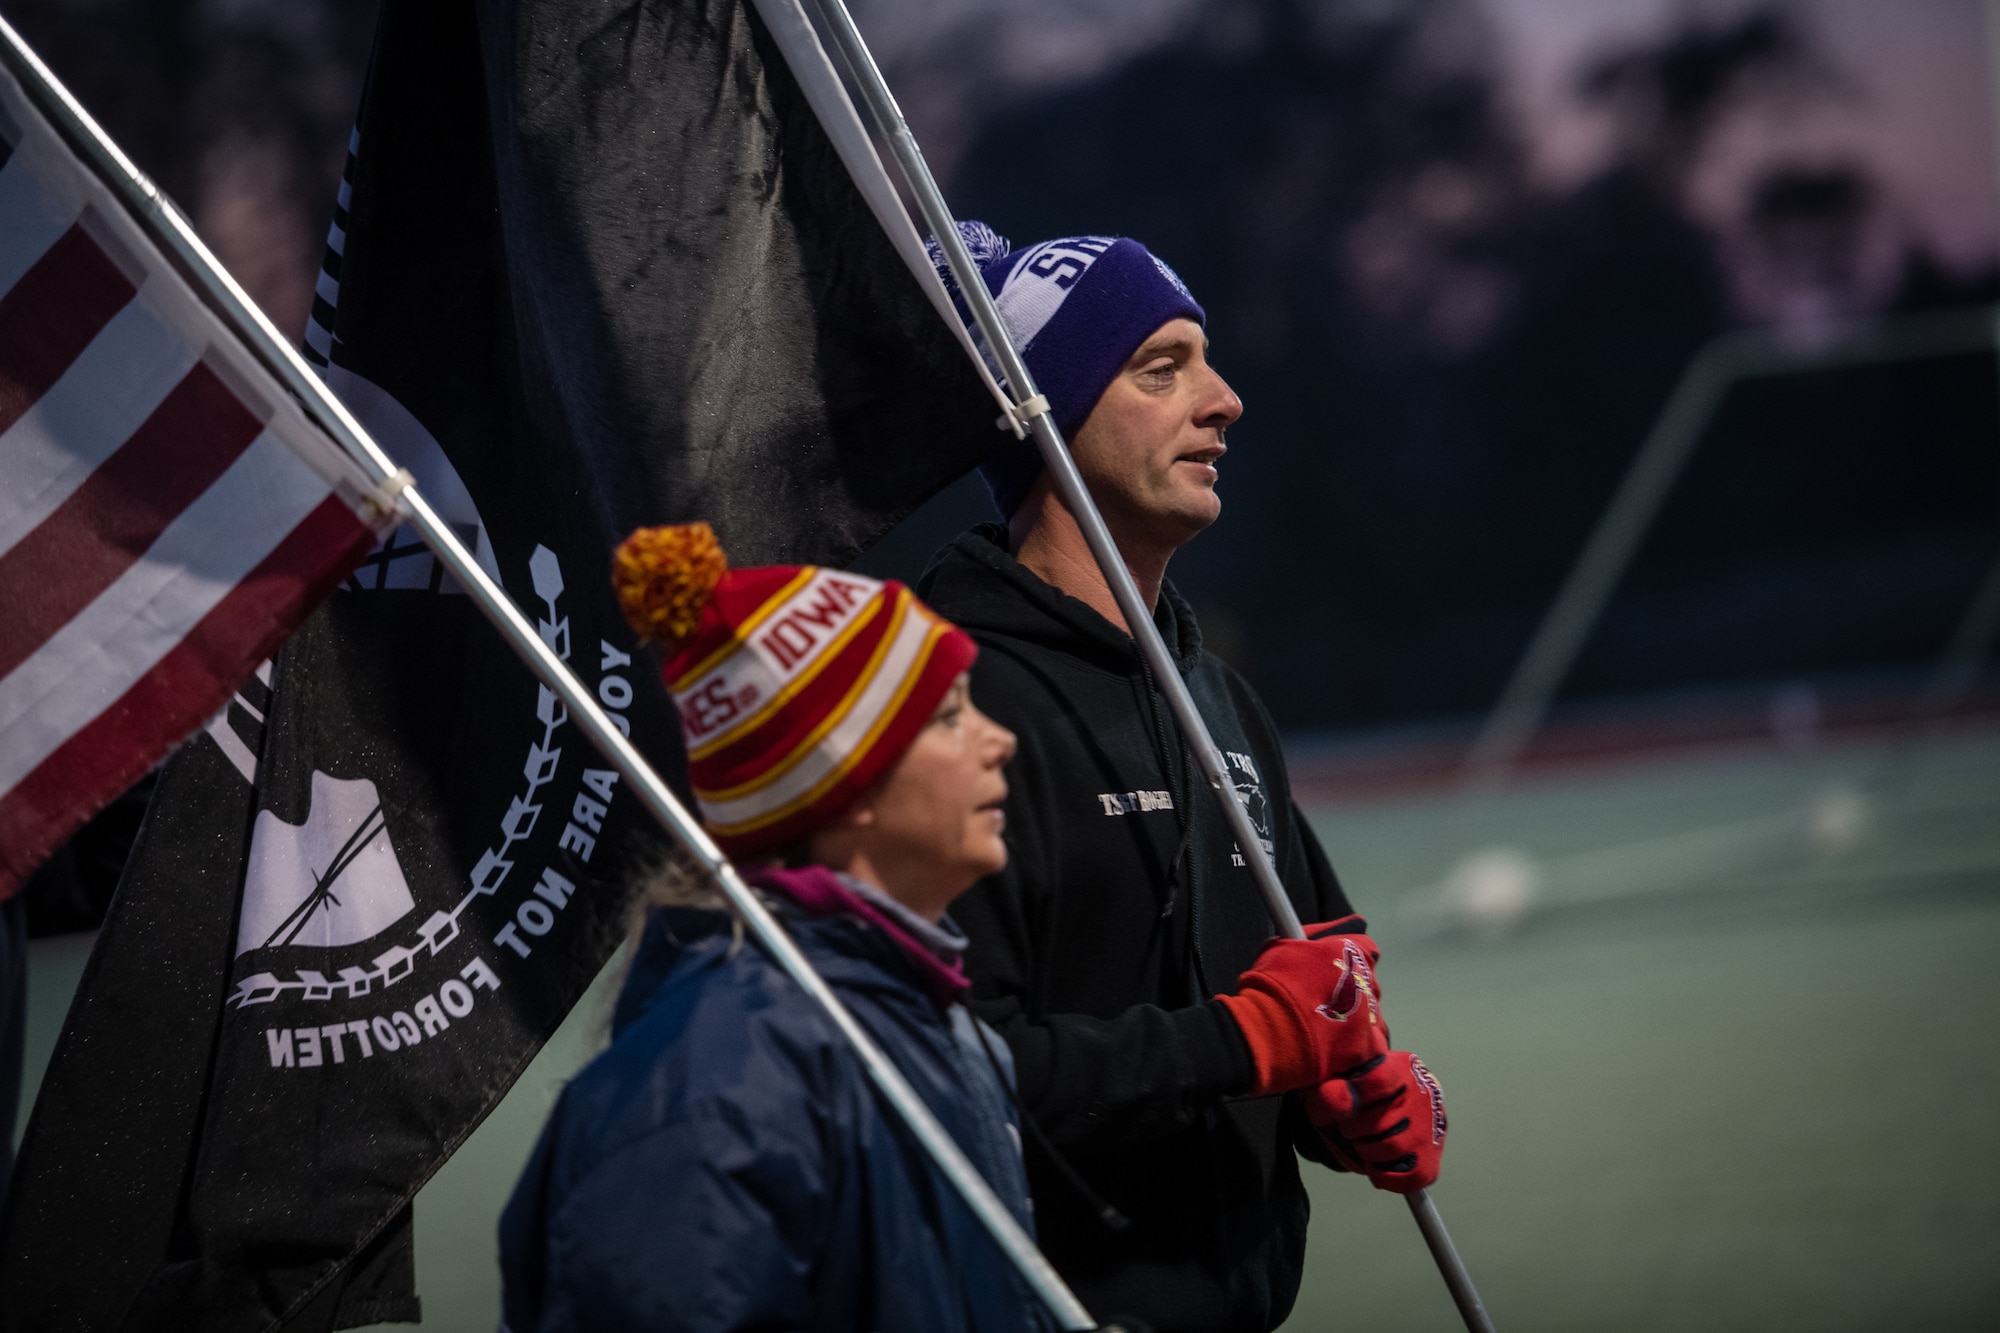 U.S. Air Force Reserve Citizen Airmen from the 932nd Airlift Wing keep the American and POW/MIA flags moving around the James Gym track during the 10th Annual Air Force Sergeants Association POW/MIA Vigil Run, Nov. 15, 2019, Scott Air Force Base, Illinois. The run/walk honors all POW/MIAs as the flag is carried for 24 hours.  The cold temperatures were visible in the cold breaths and frost on the flags but that didn't stop the flags from continually moving.   (U.S. Air Force photo by Christopher Parr)